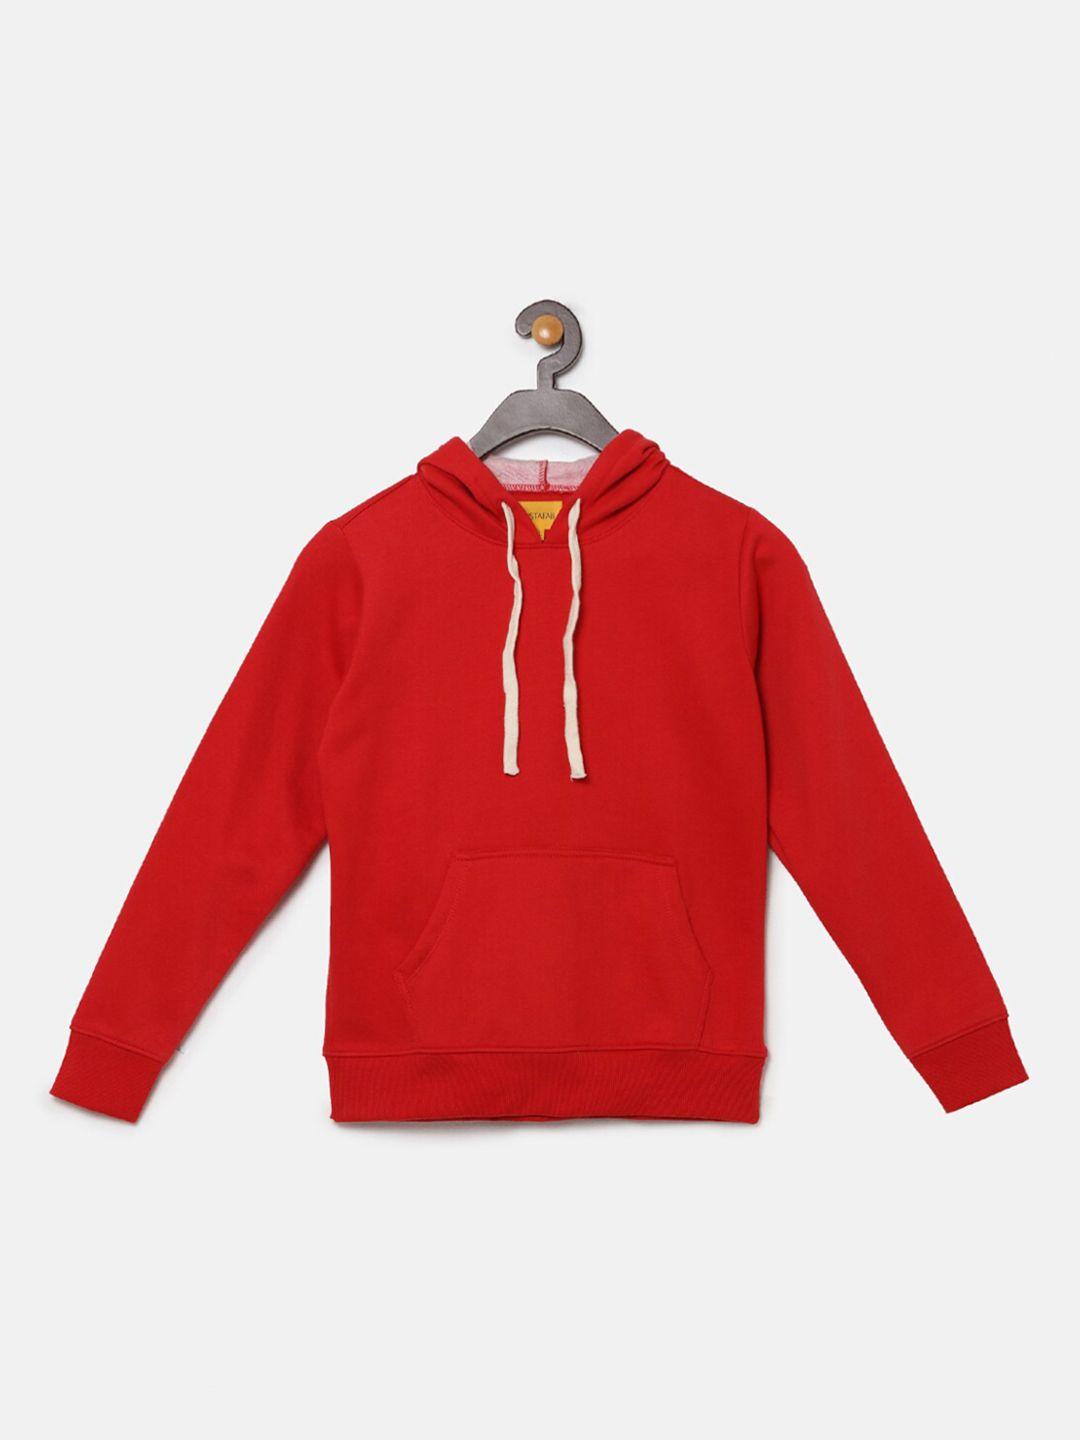 instafab-boys-red-pure-cotton-solid-hooded-pullover-sweatshirt